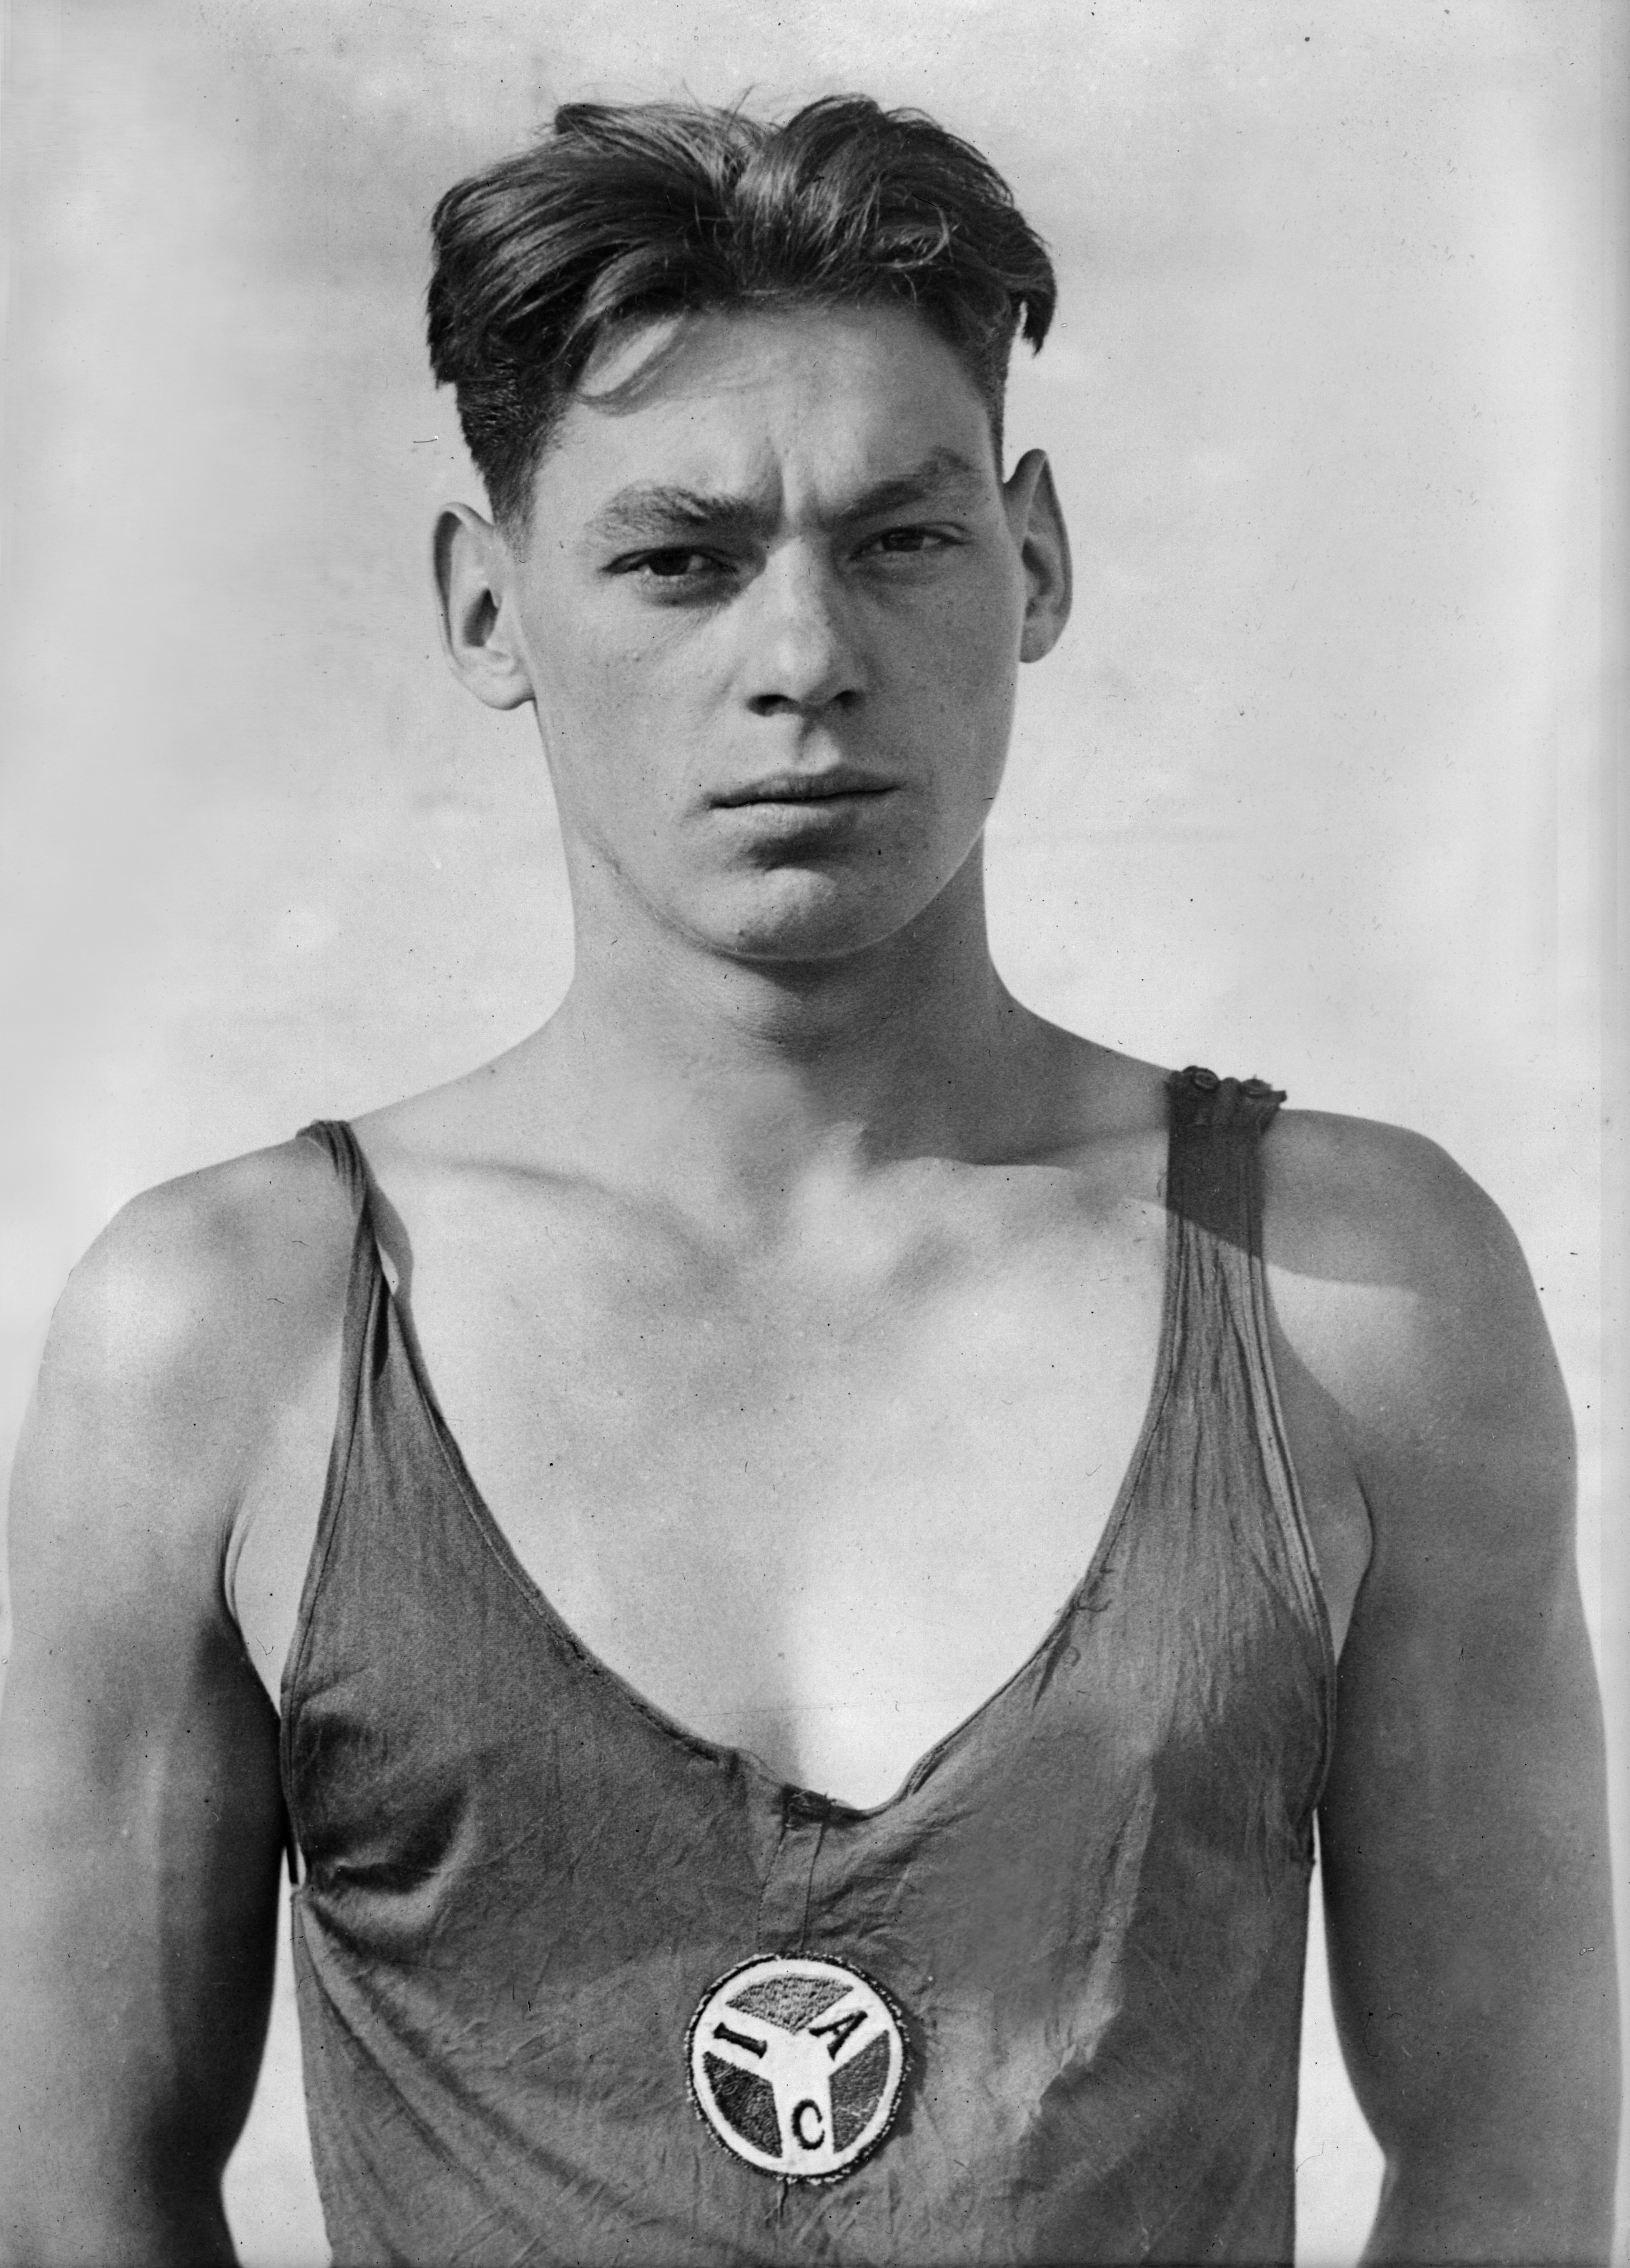 Johnny Weissmuller swims the 100 meters freestyle in 58.6 seconds breaking the world swimming record and the 'minute barrier'